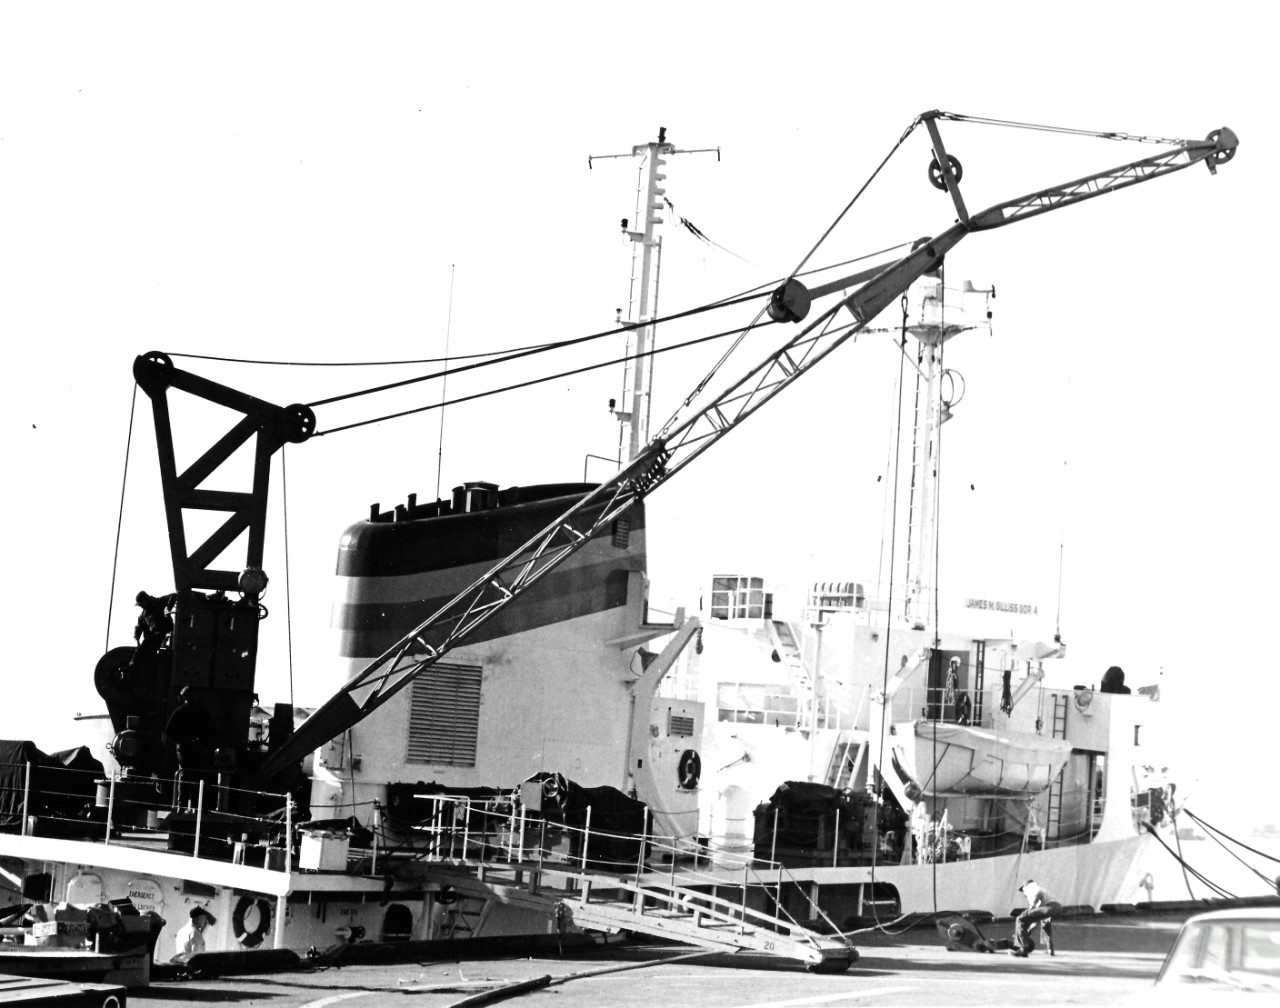 NMUSN-24:   USNS James M. Gilliss (T-AGOR-4) at Washington Navy Yard, Washington, D.C., December 1962.    The oceanographic research ship was at the yard from December 12-14.    National Museum of the U.S. Navy Photograph Collection.    